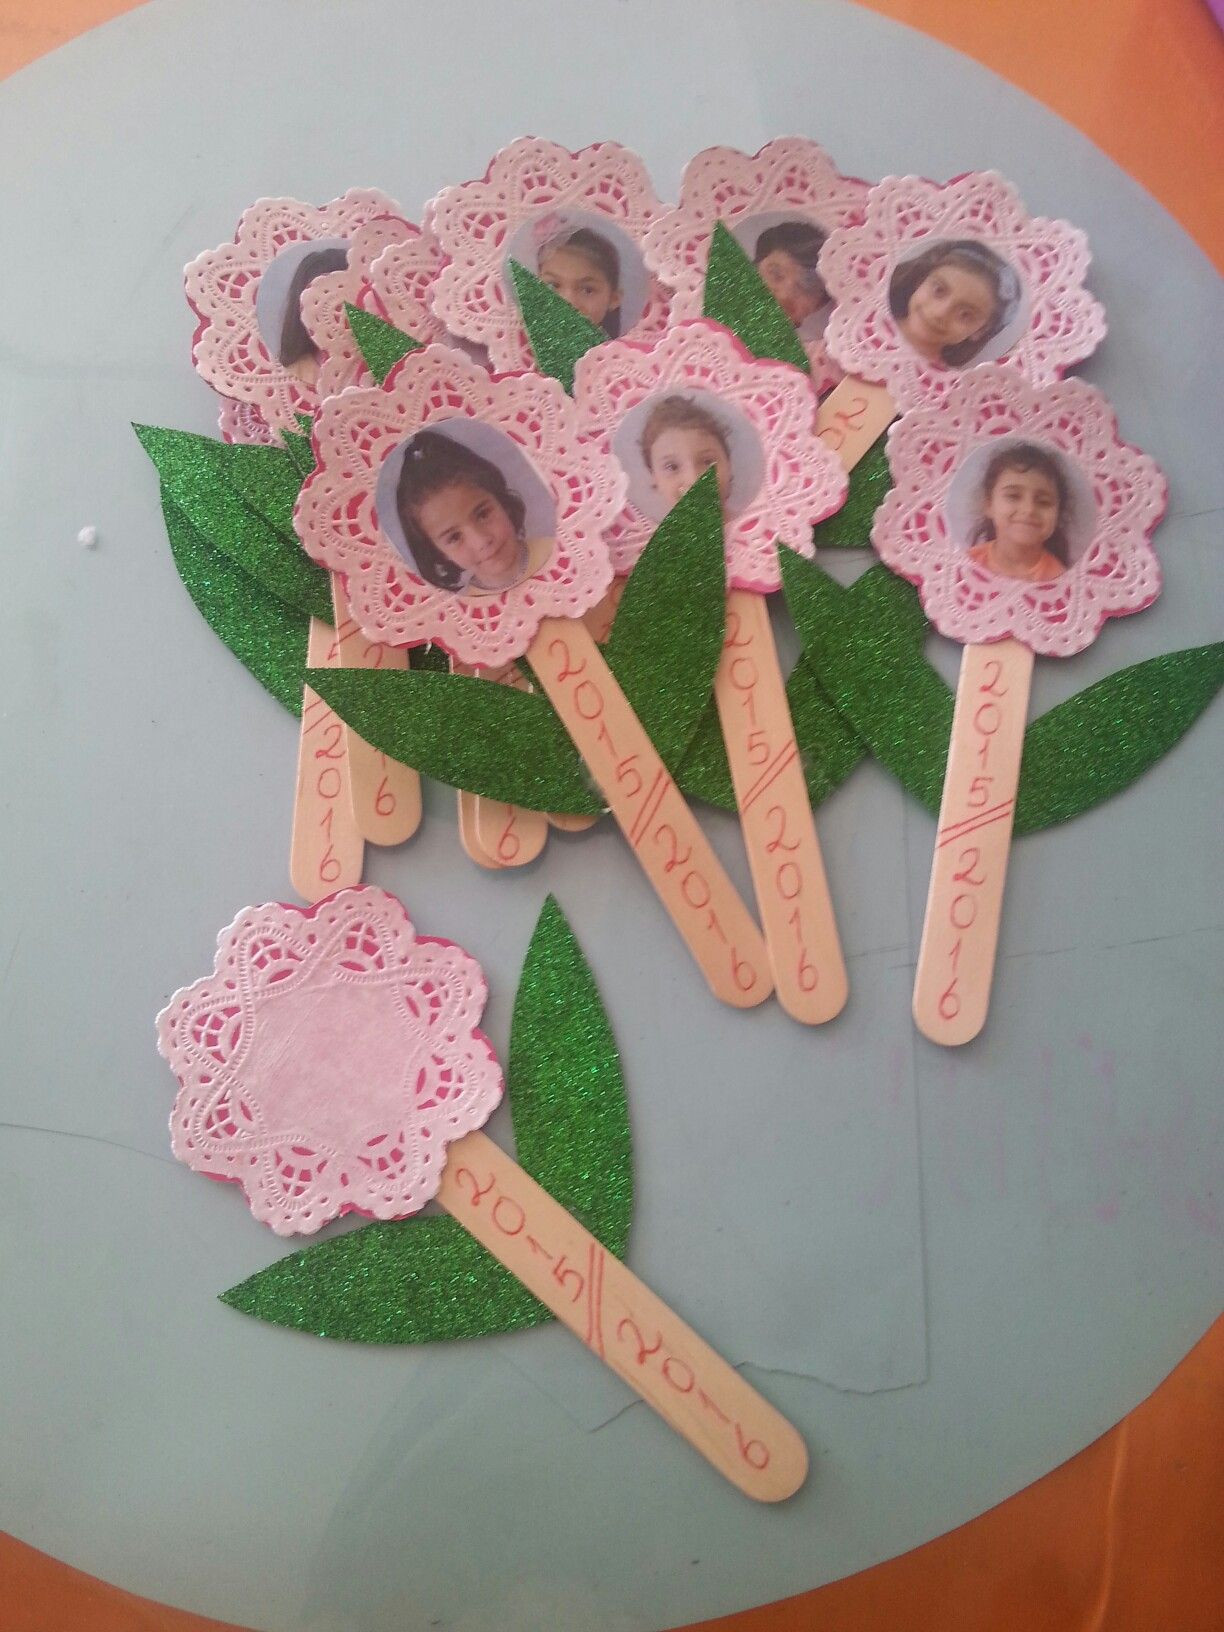 Pinterest Mothers Day Crafts
 10 Marvellous Mother s Day Crafts For Kids That They ll